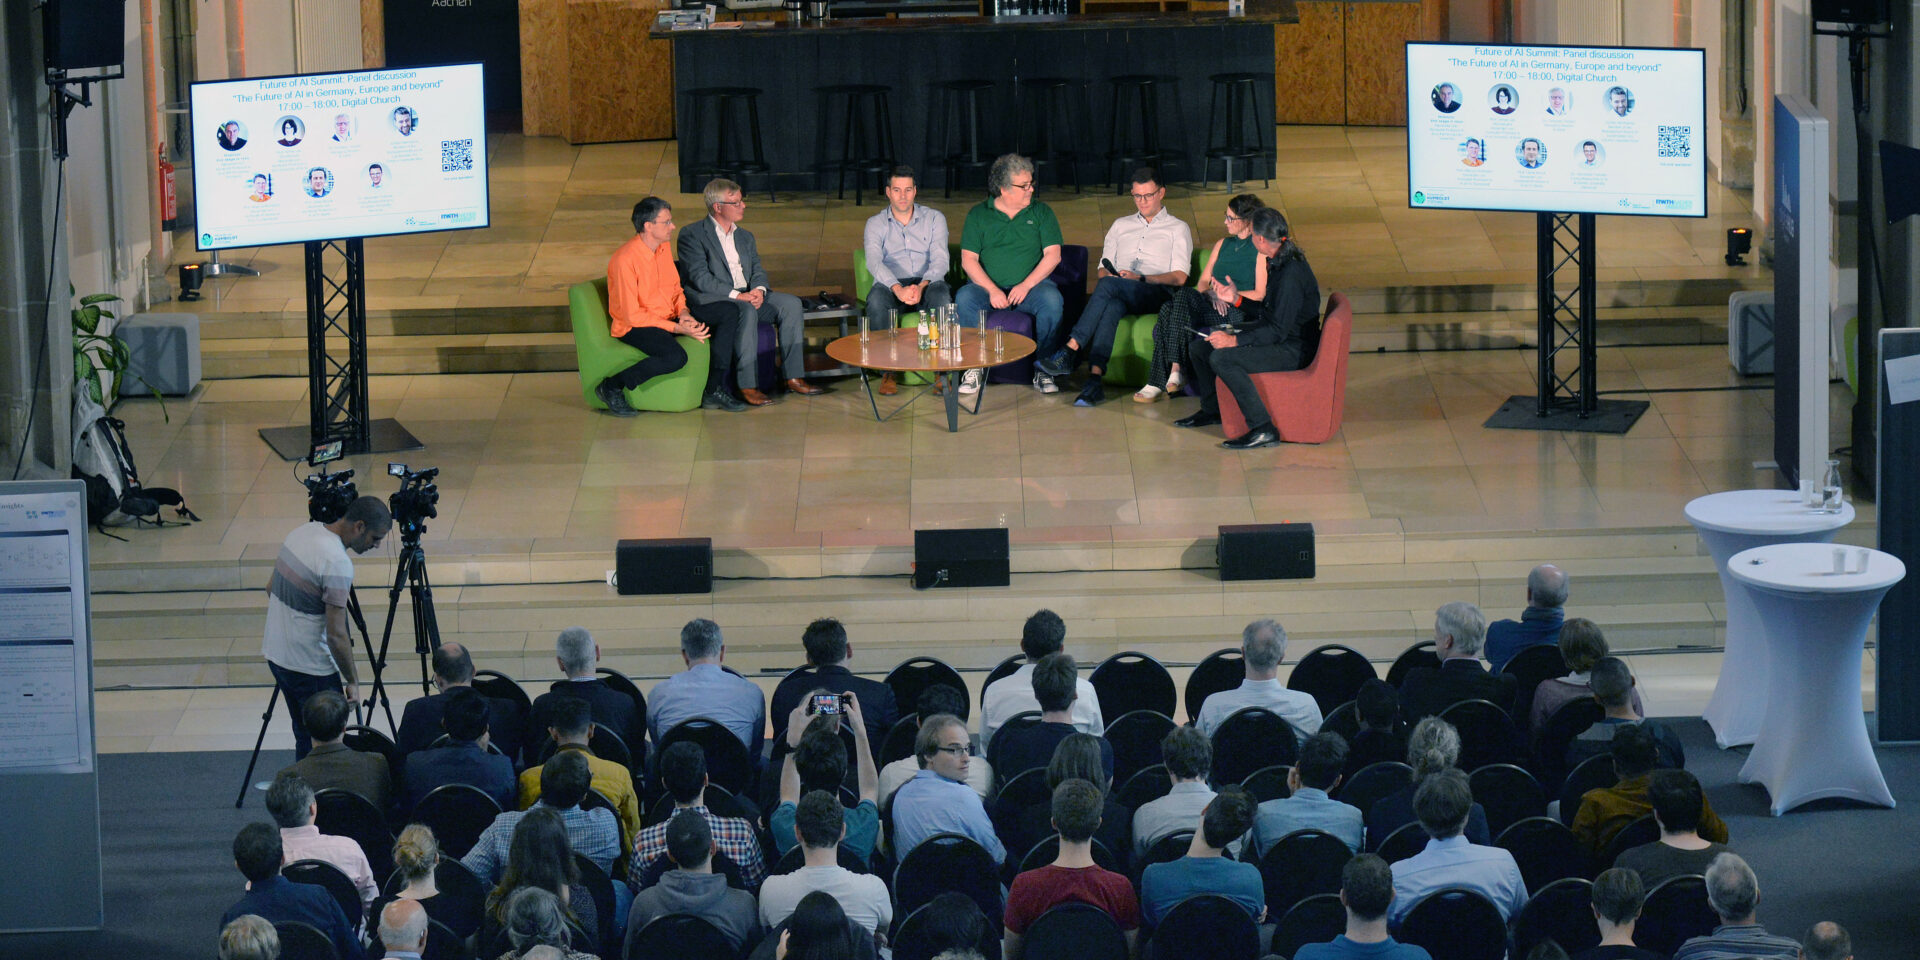 Public Panel Discussion: "The Future of AI in Germany, Europe and beyond" – Moderator: Prof. Holger Hoos, Participants: Prof. Aimee van Wynsberghe, Dr. Temath, Mr Hermanns + AvH Professor and Young Researcher.